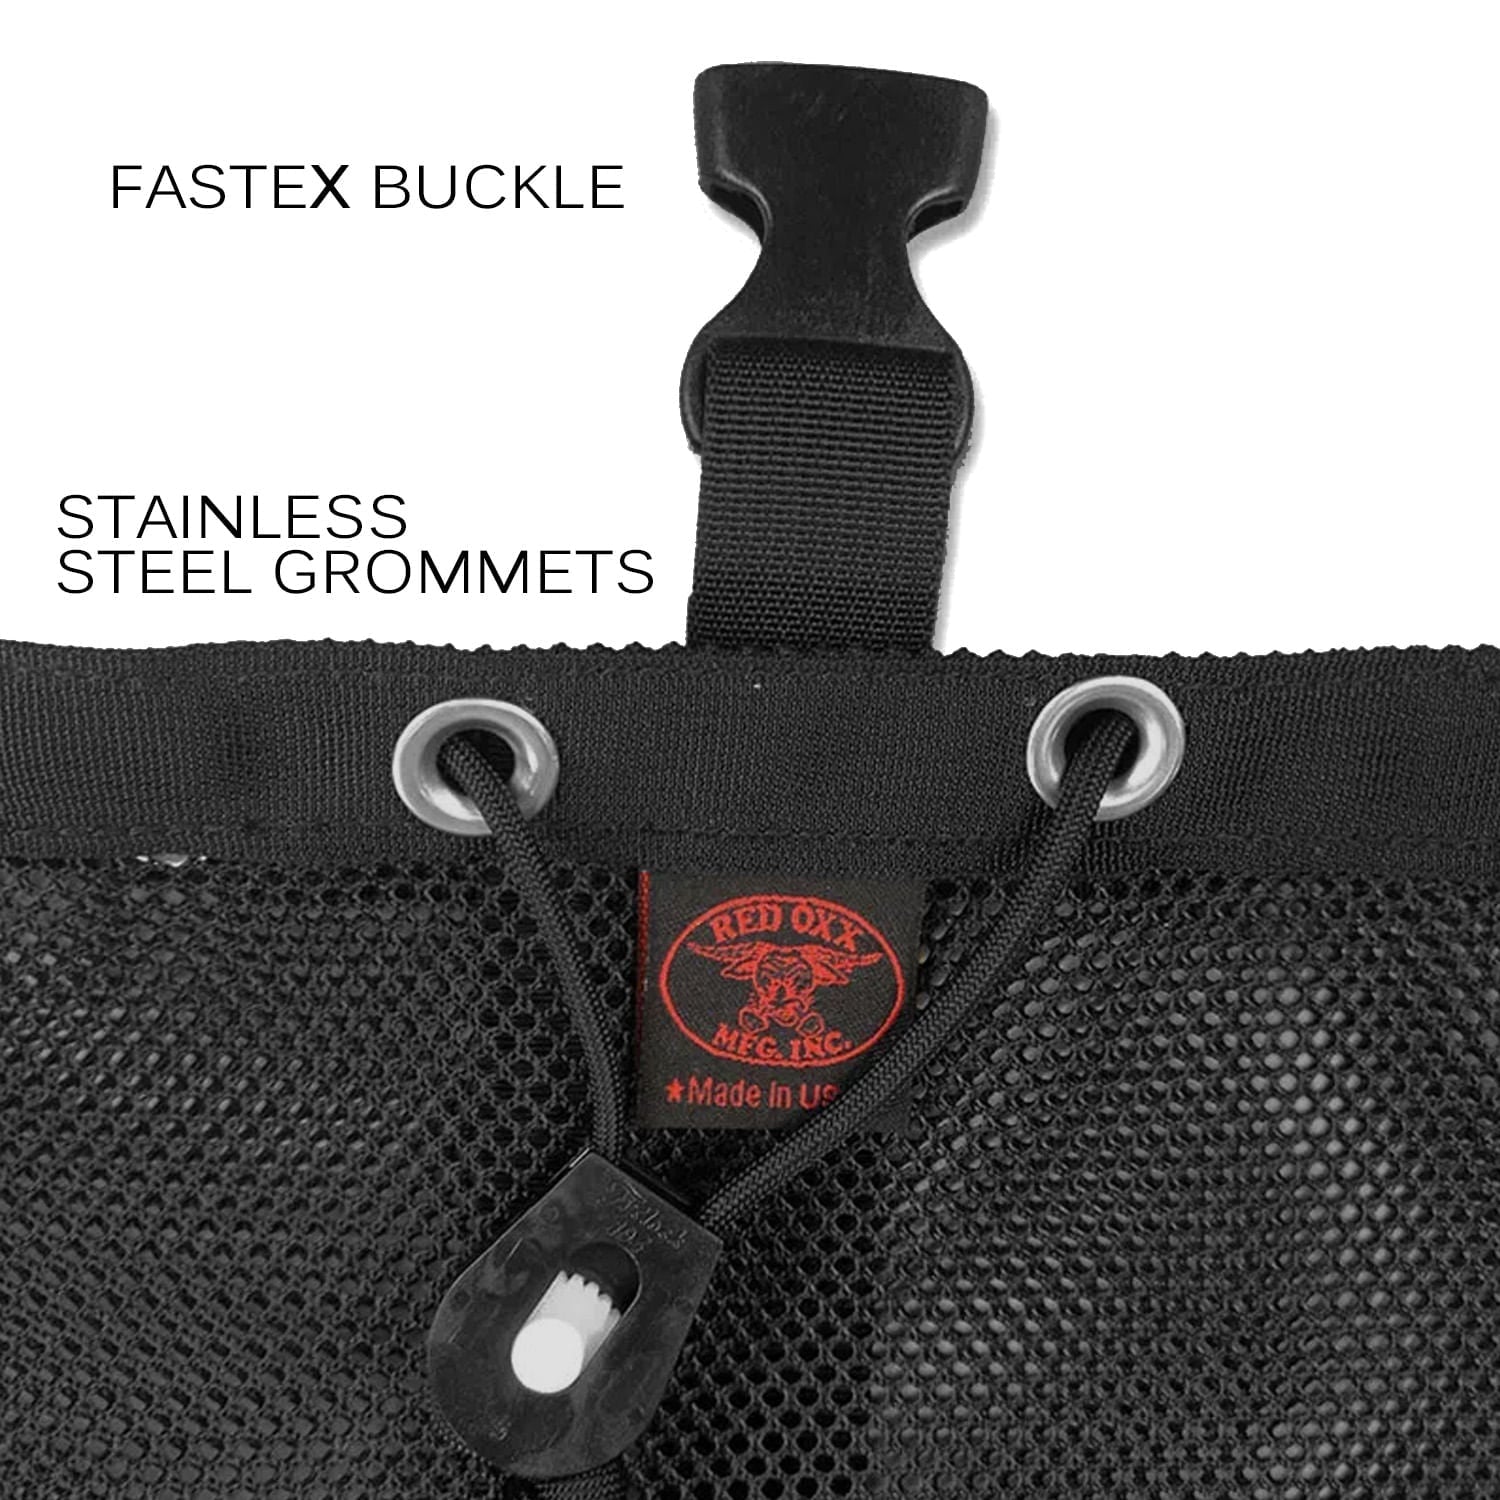 Fastex buckle stainless steel grommets 